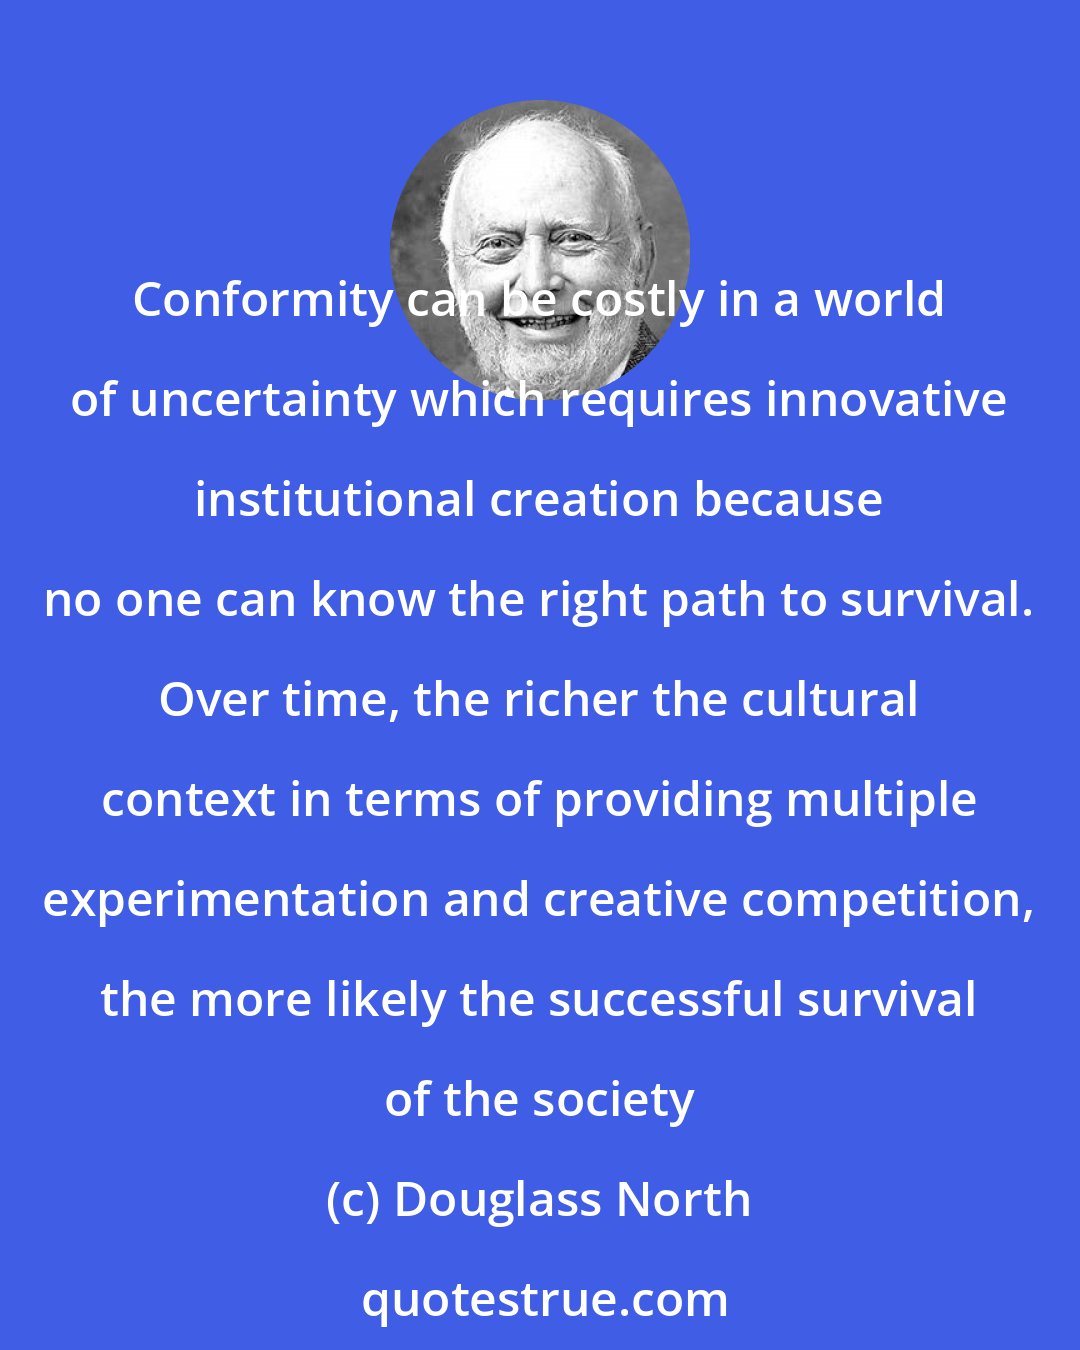 Douglass North: Conformity can be costly in a world of uncertainty which requires innovative institutional creation because no one can know the right path to survival. Over time, the richer the cultural context in terms of providing multiple experimentation and creative competition, the more likely the successful survival of the society